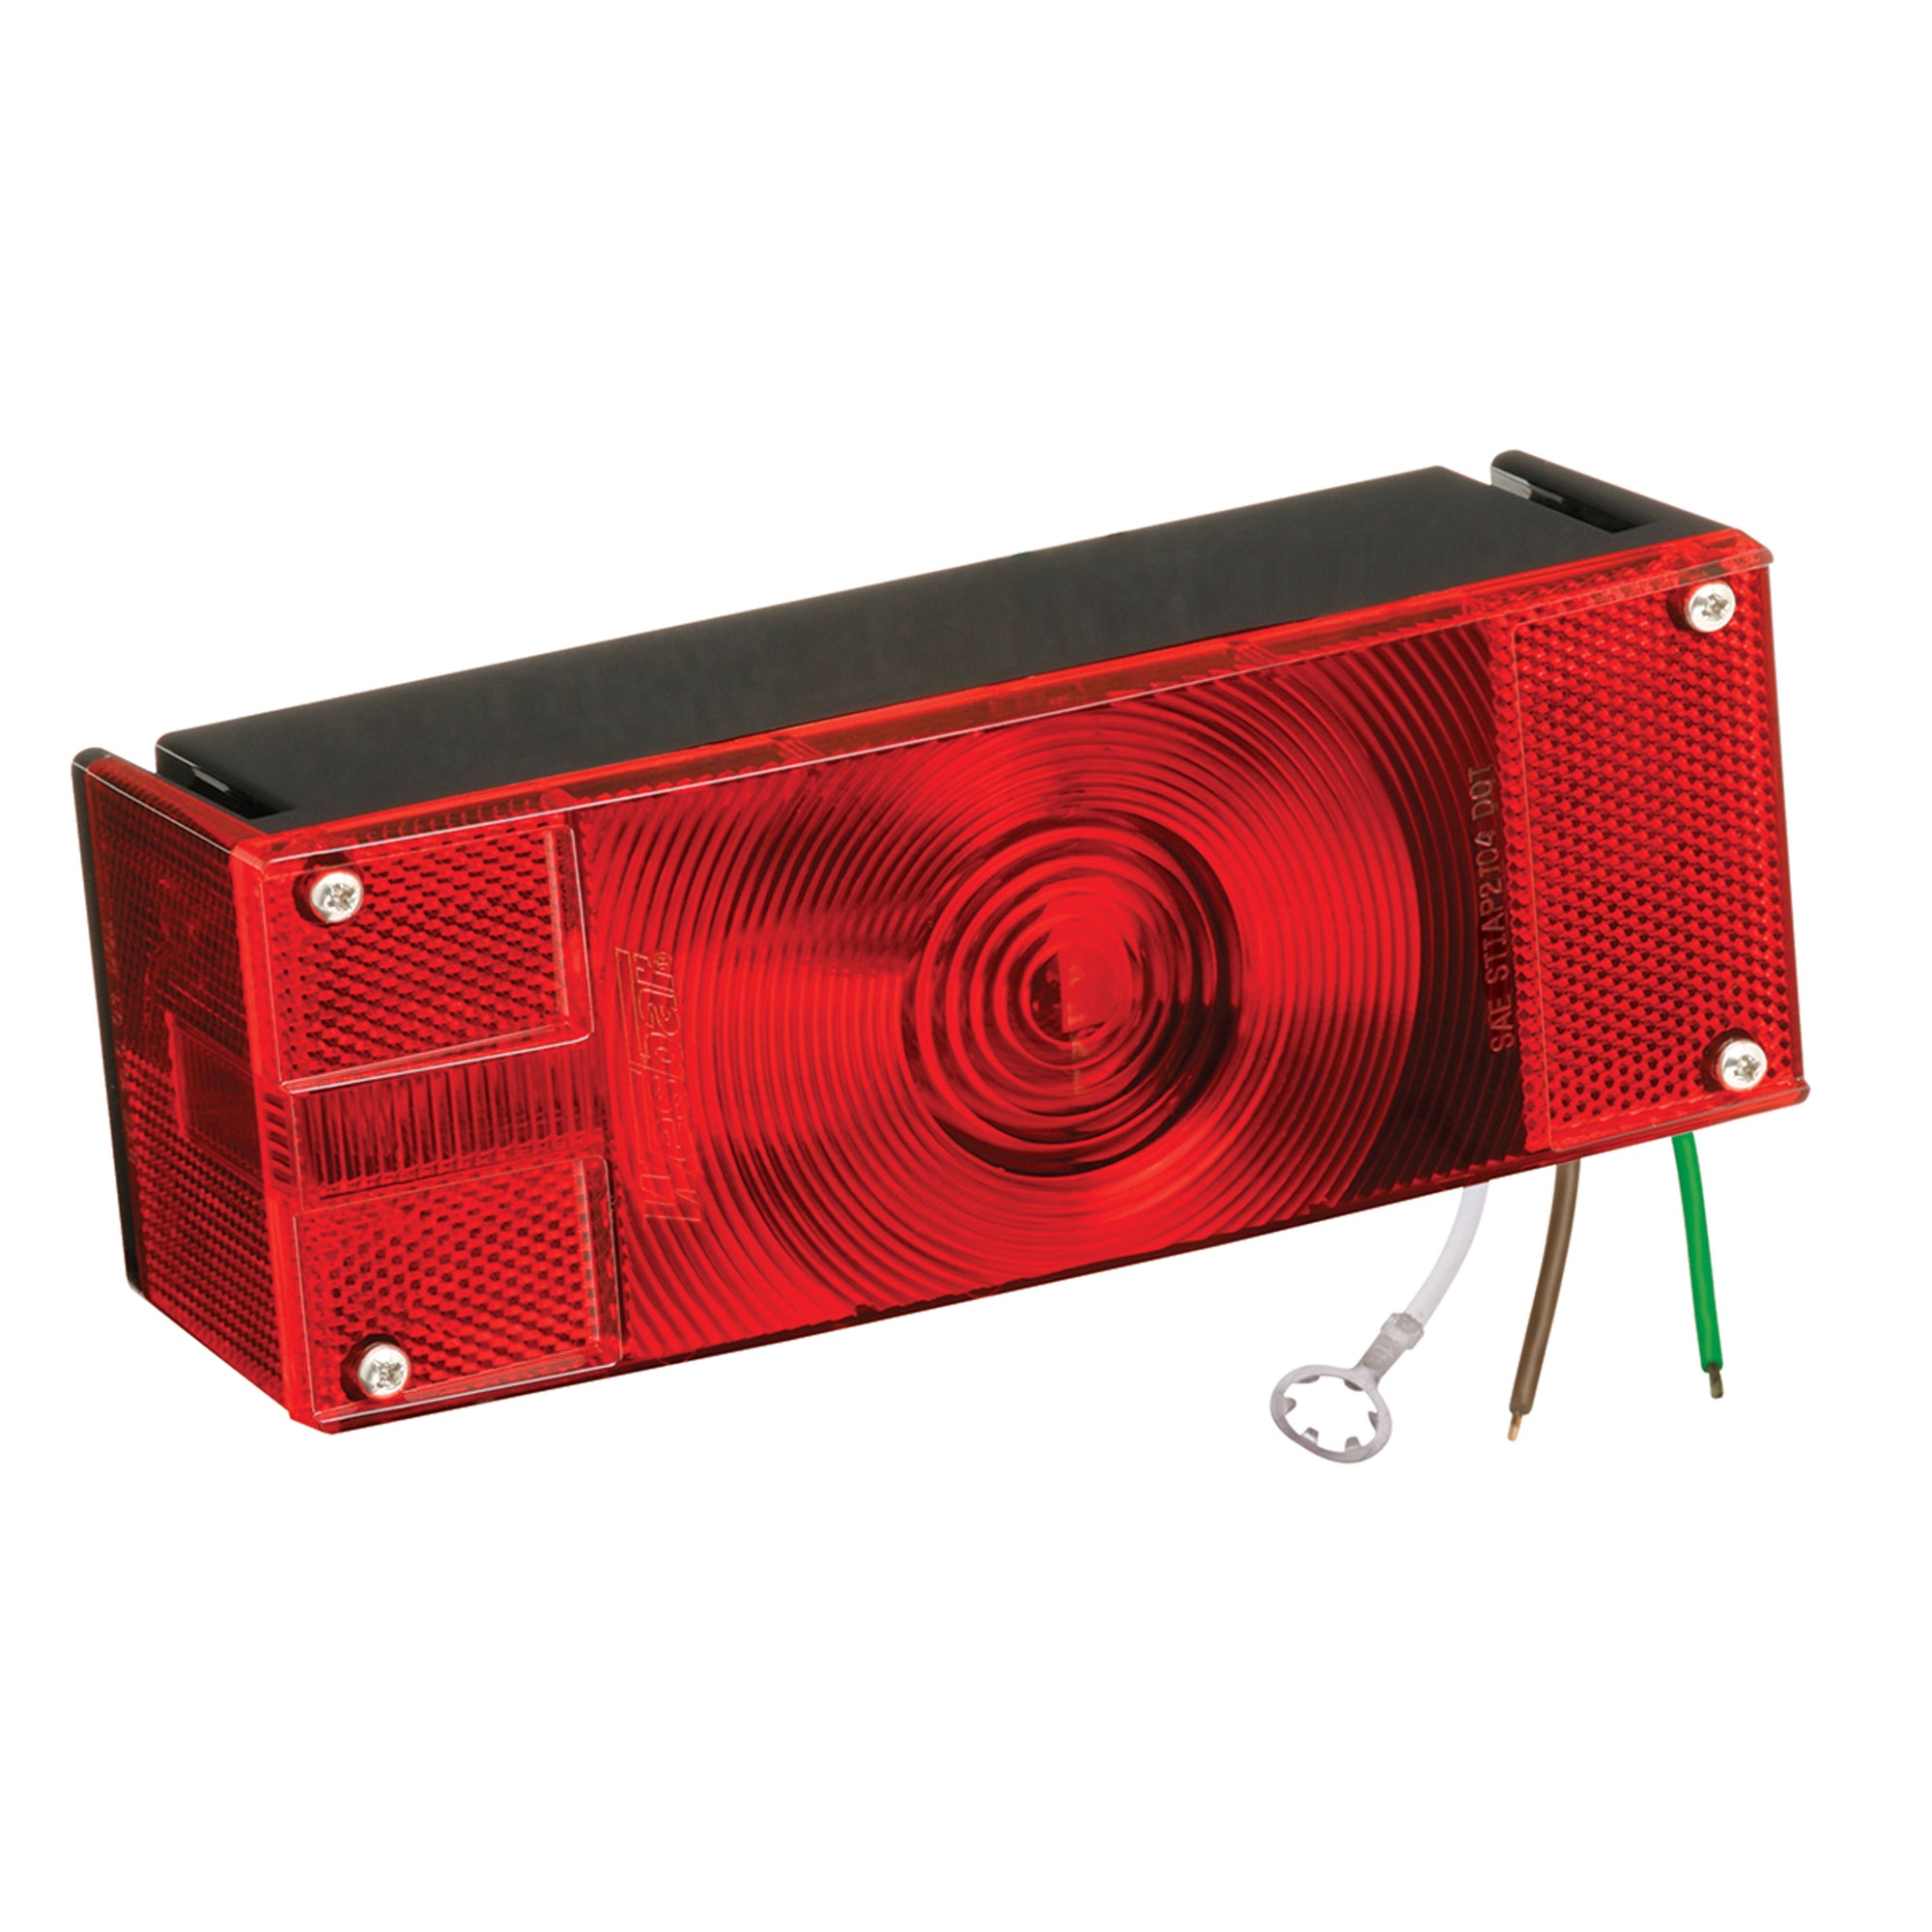 Wesbar 403026 Submersible Low Profile Taillight - 8 Function, Left/Roadside